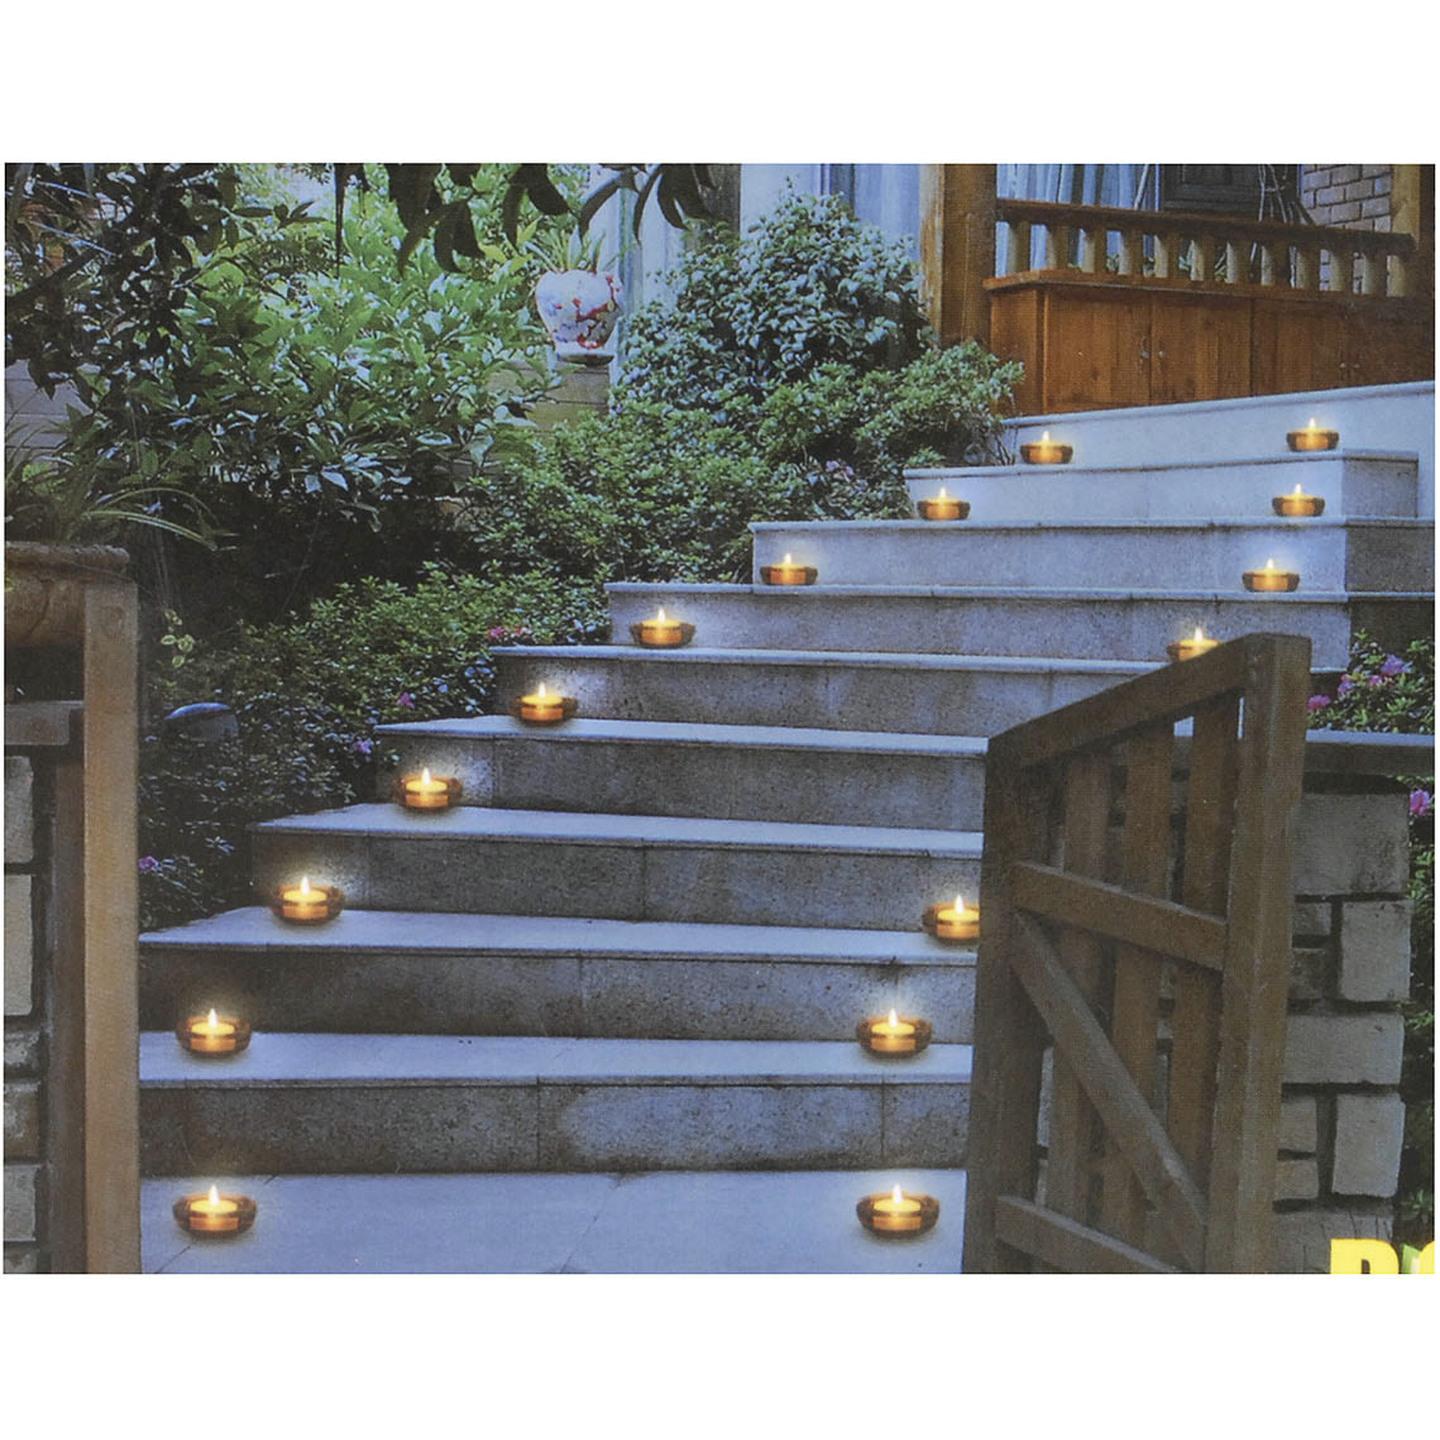 Pack of 12 LED Tealight Candle Set